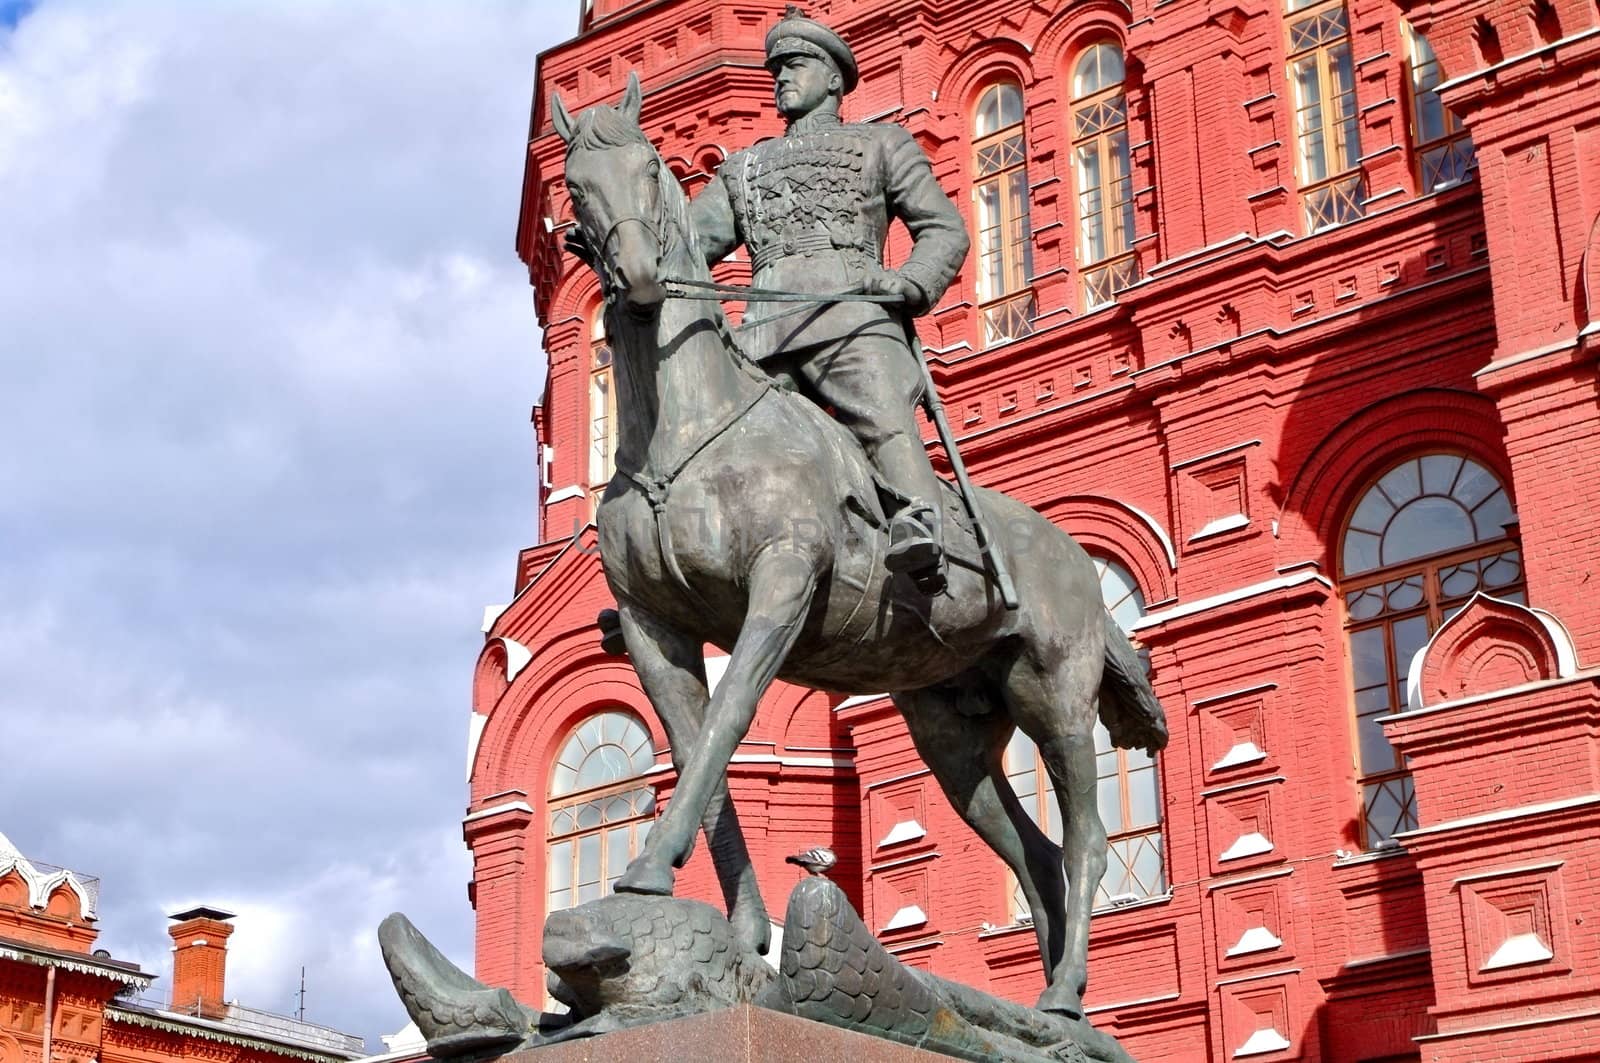 Zhukov monument near National historic museum in Moscow, Russia